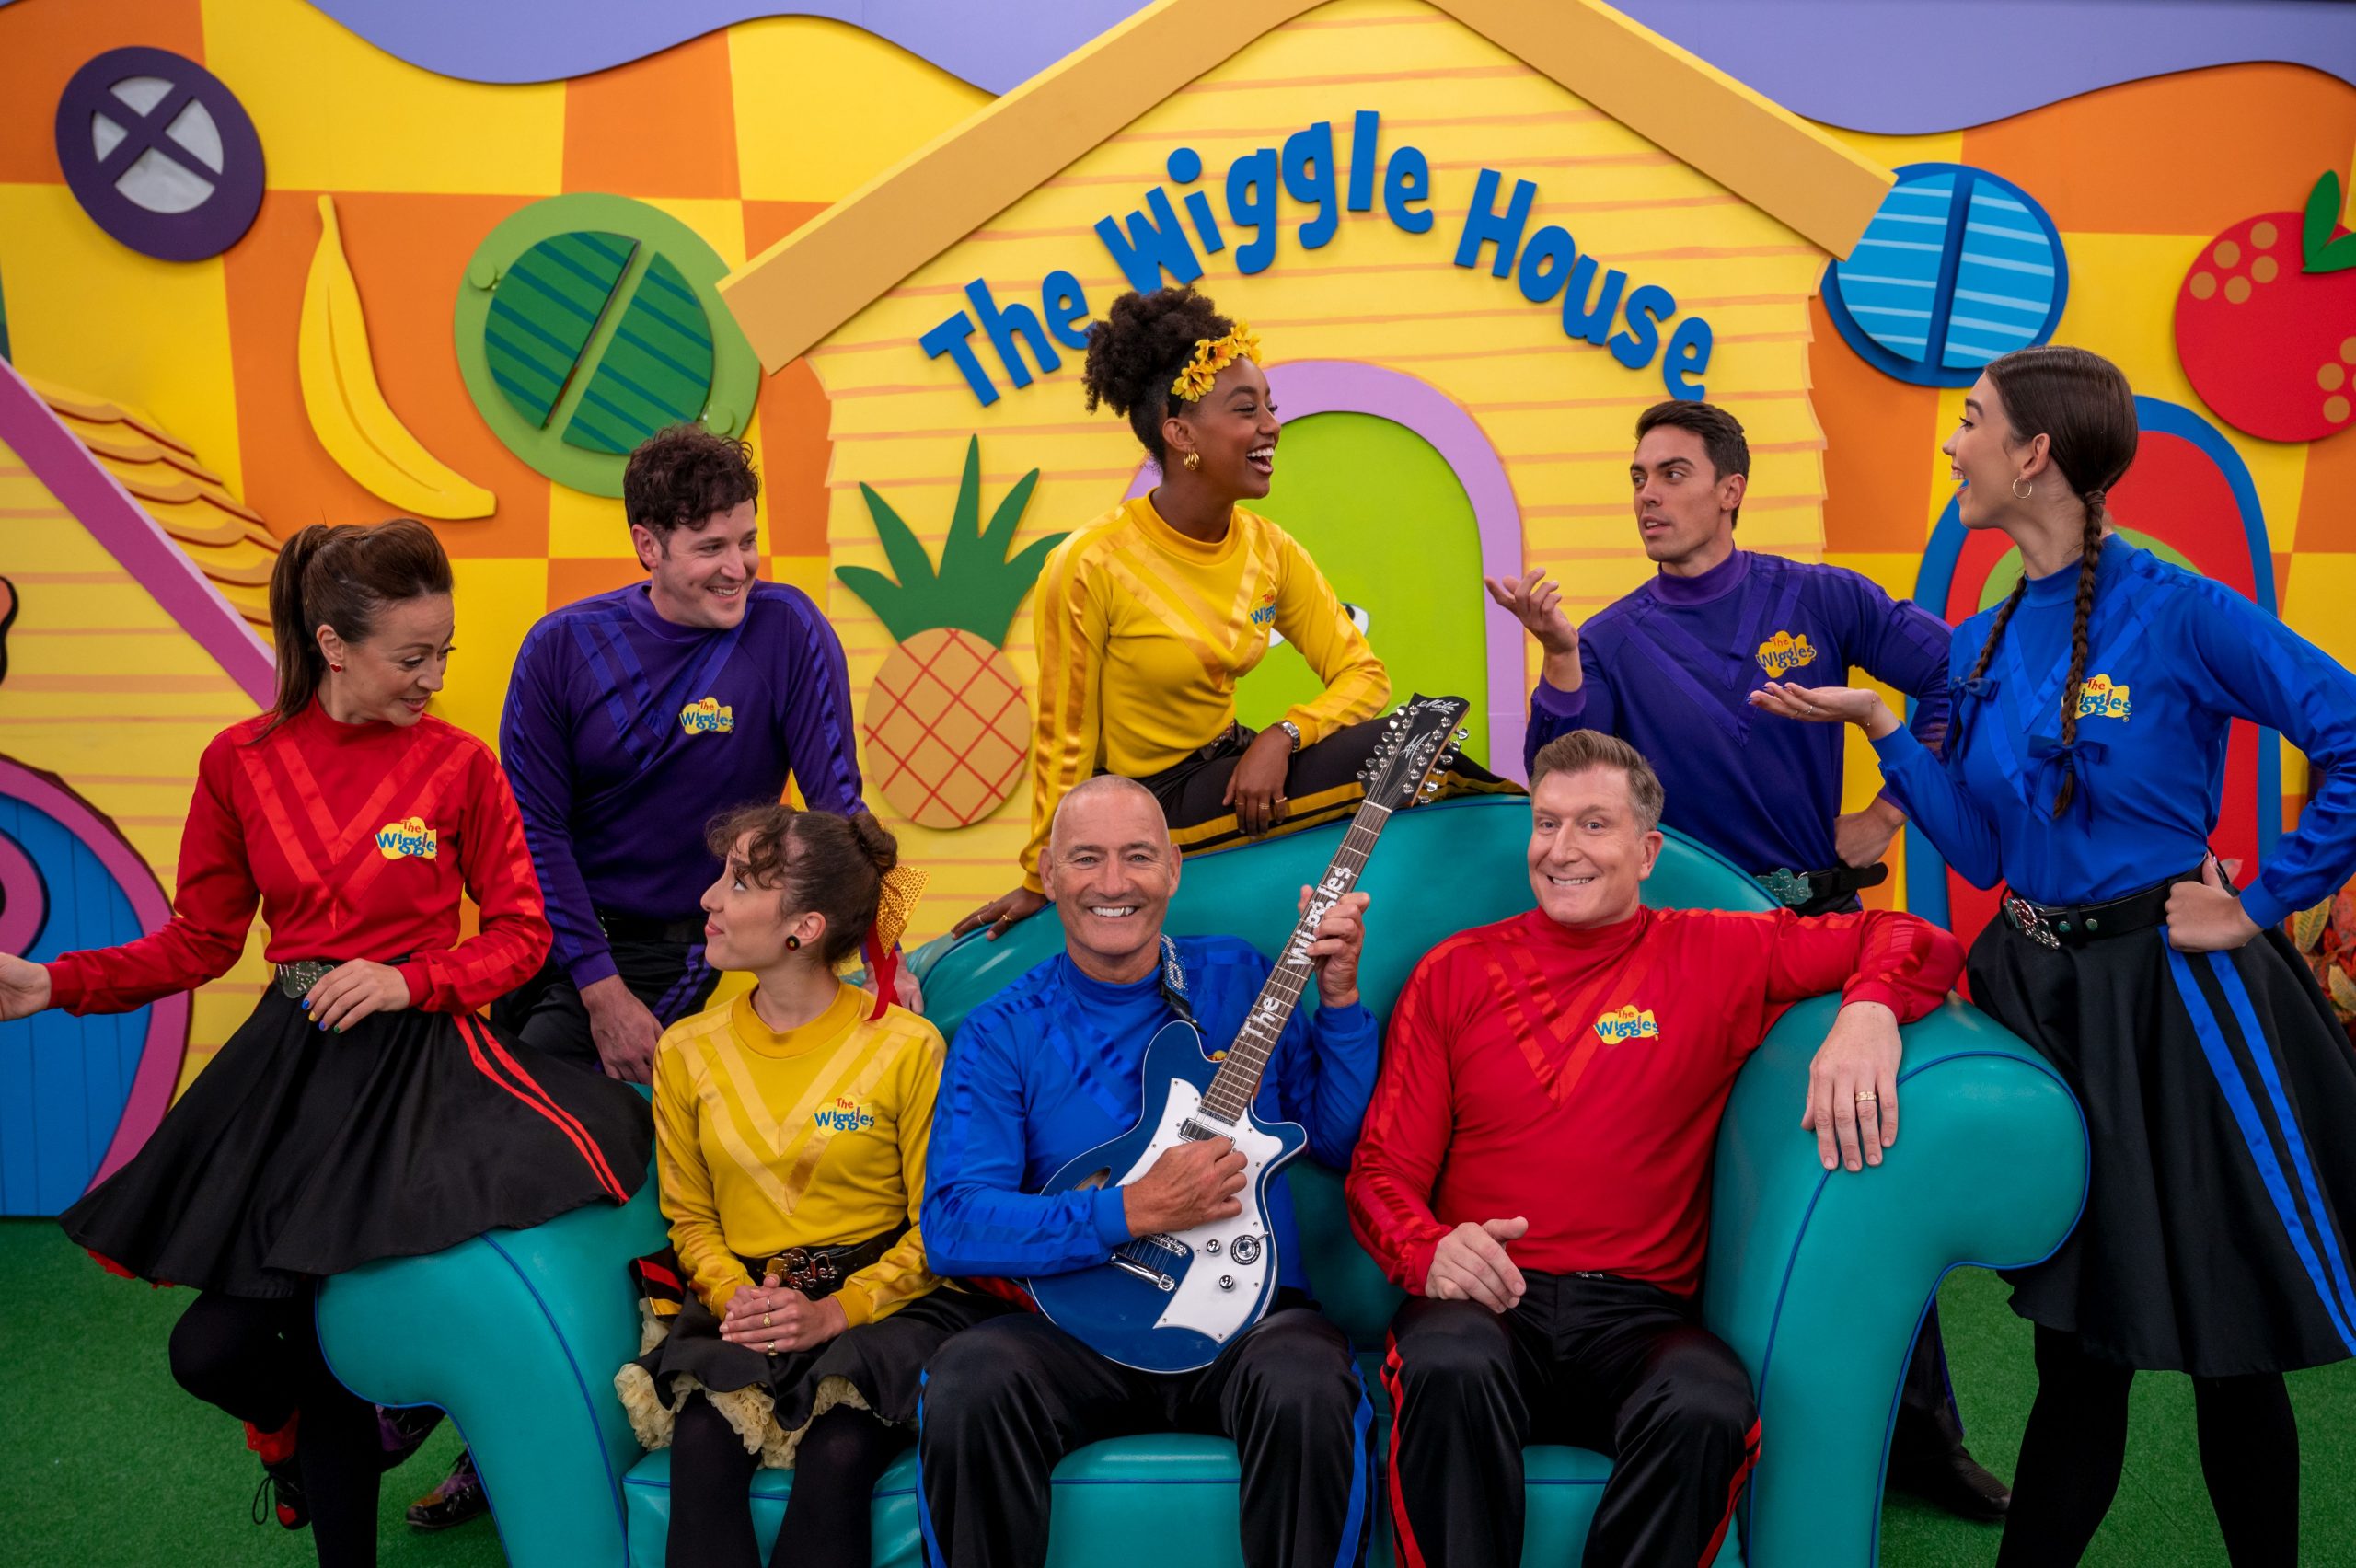 wiggles tour announcement